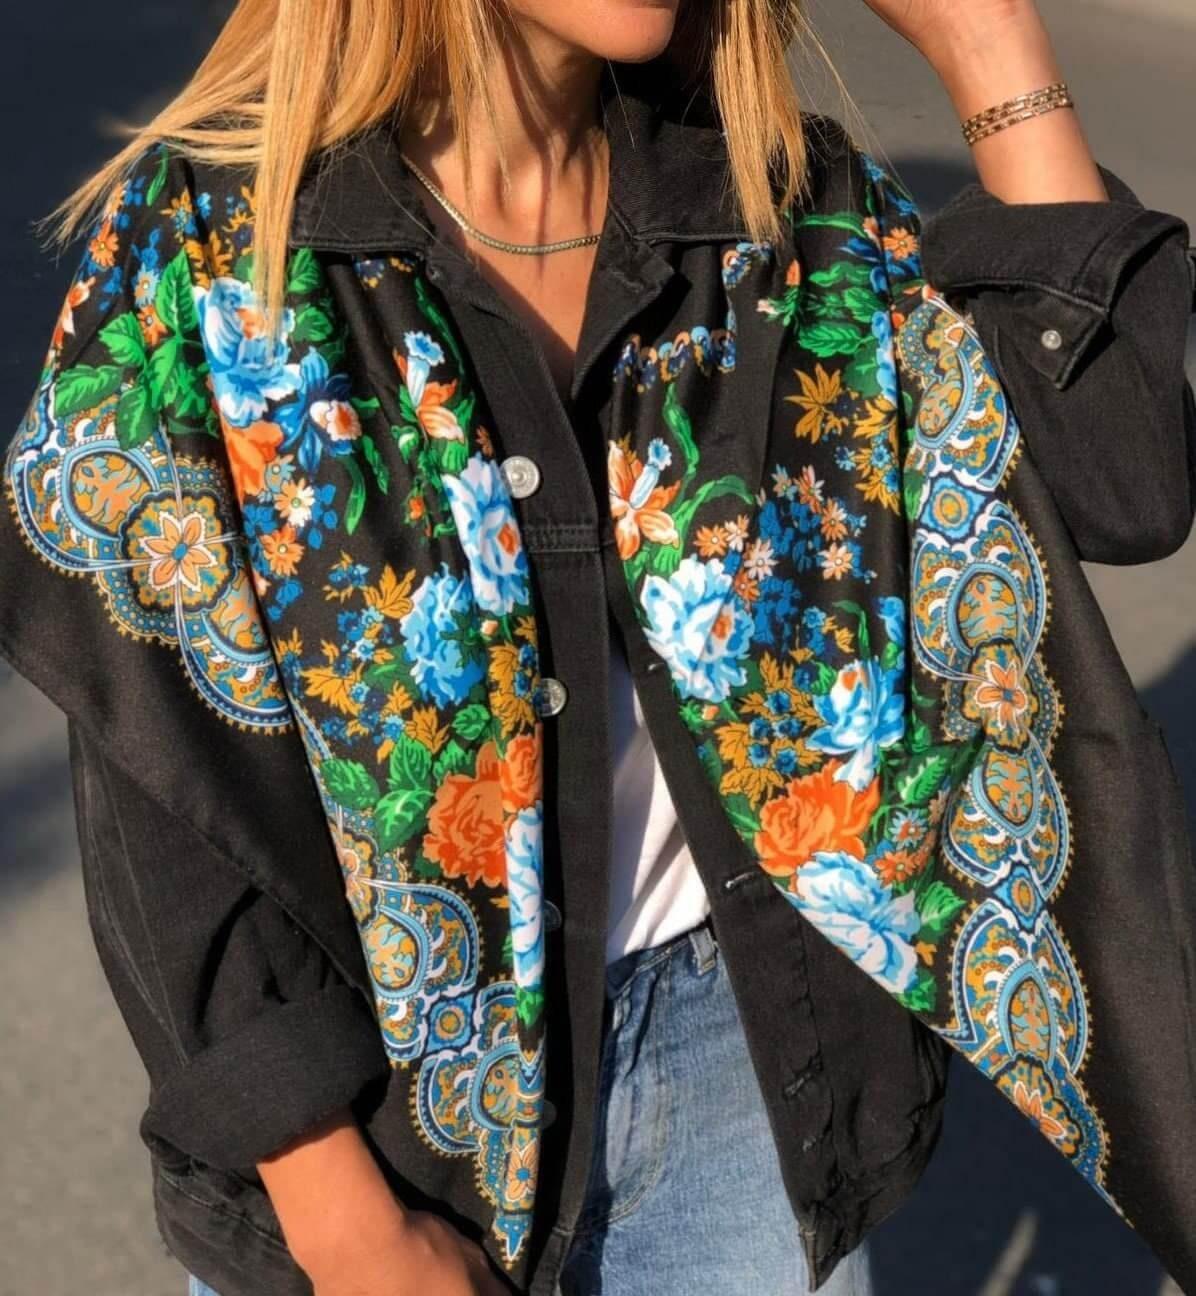 Handcrafted Black and Multicolor Floral Cotton Scarf - Perfect All Season Accessory, Best Gift for Her in Black, Orange, Blue, and Green available at Moyoni Design